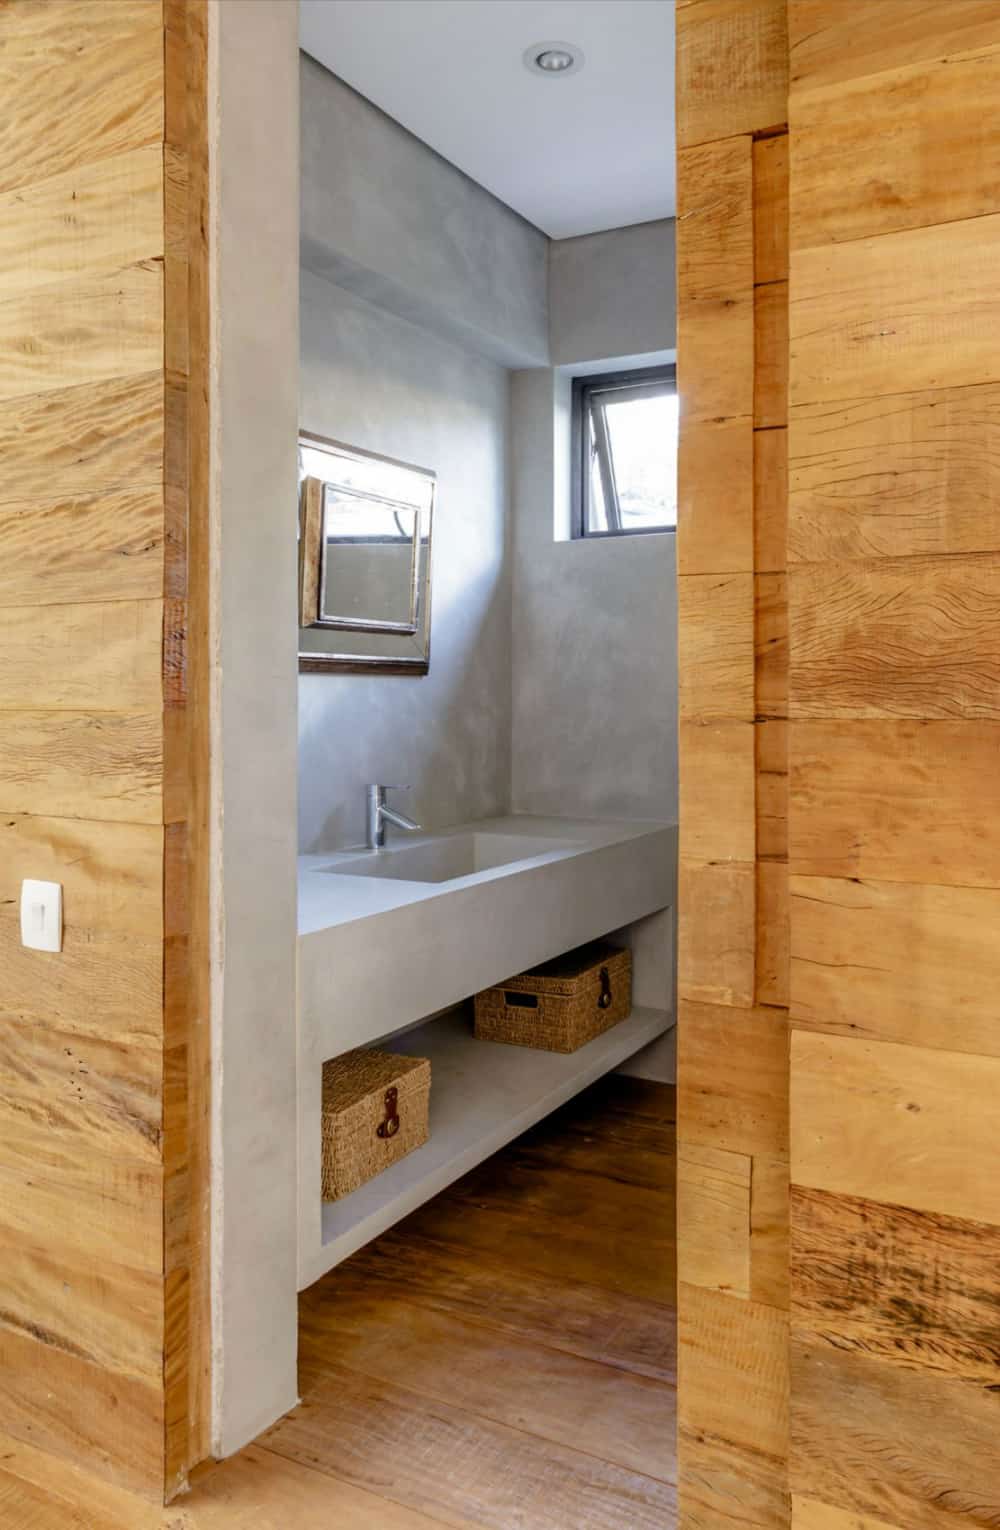 Concrete bathroom with a built-in vanity